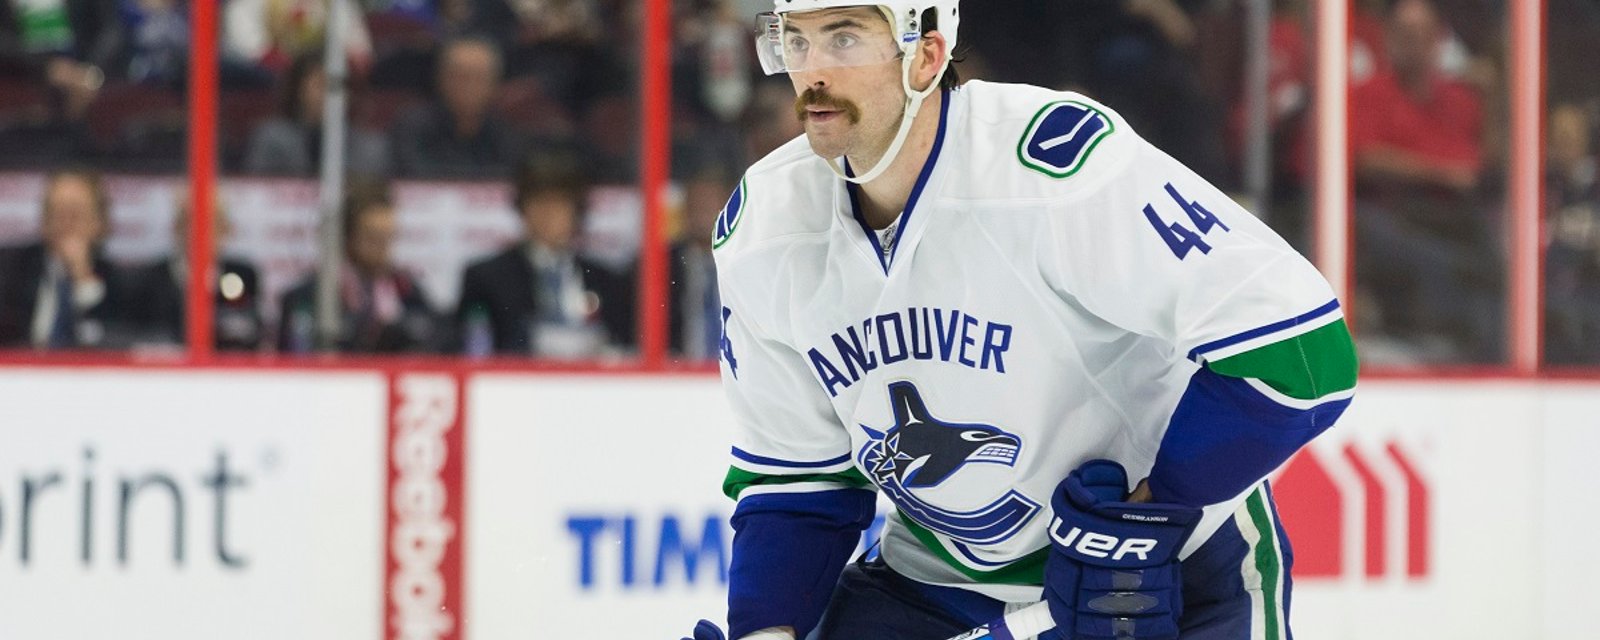 Gudbranson attempts to downplay his threats after increased scrutiny from the NHL.